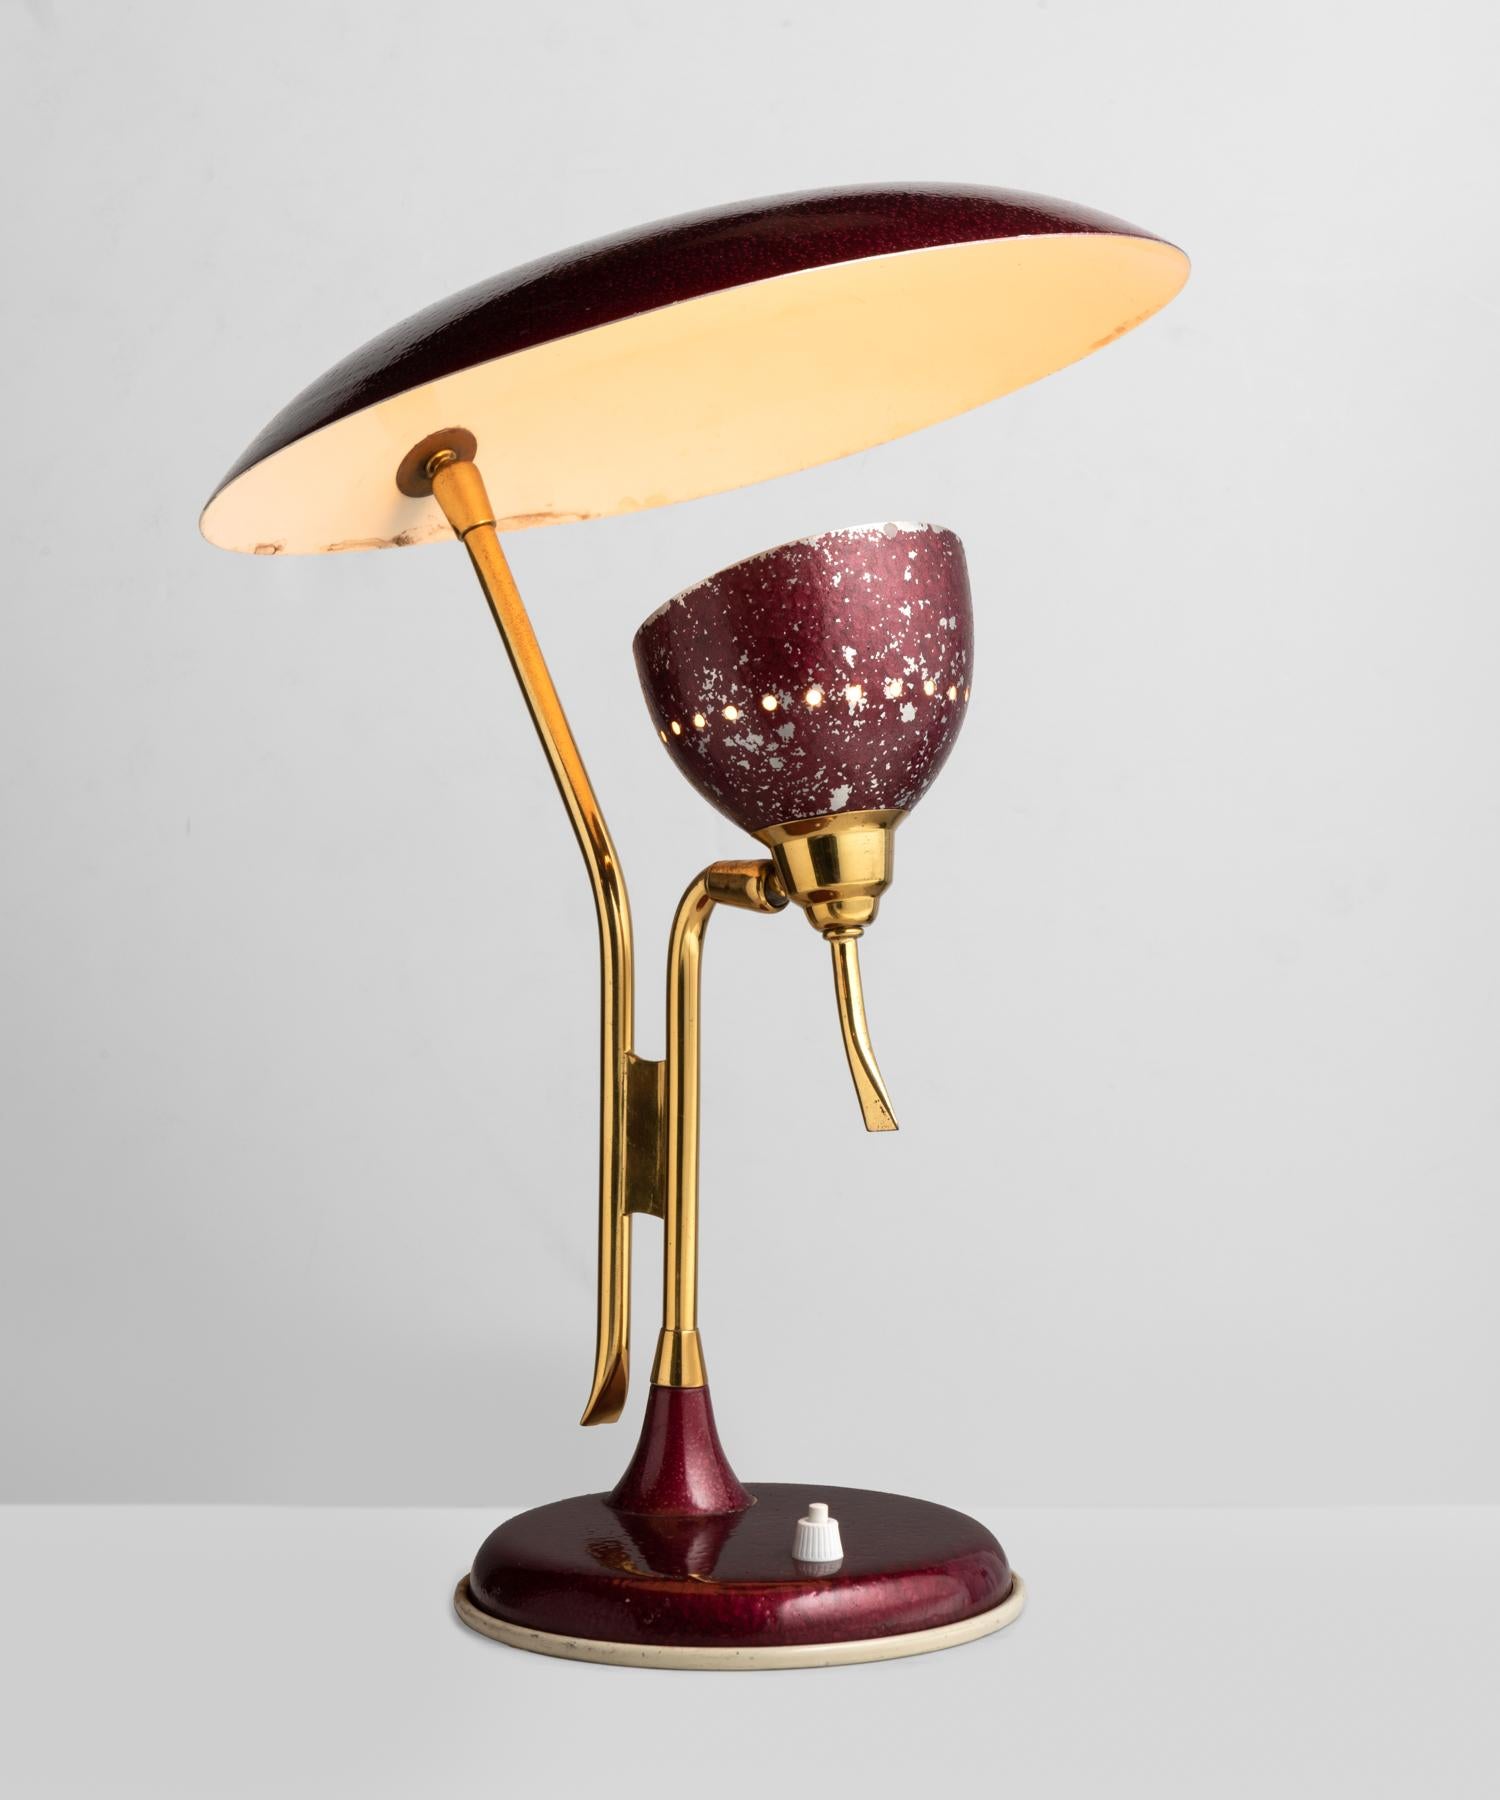 Brass & Burgundy table lamp, Italy, circa 1950.

Unique form in original, metallic burgundy paint includes two adjustable brass arms to individually adjust the shade and a larger reflective dish.